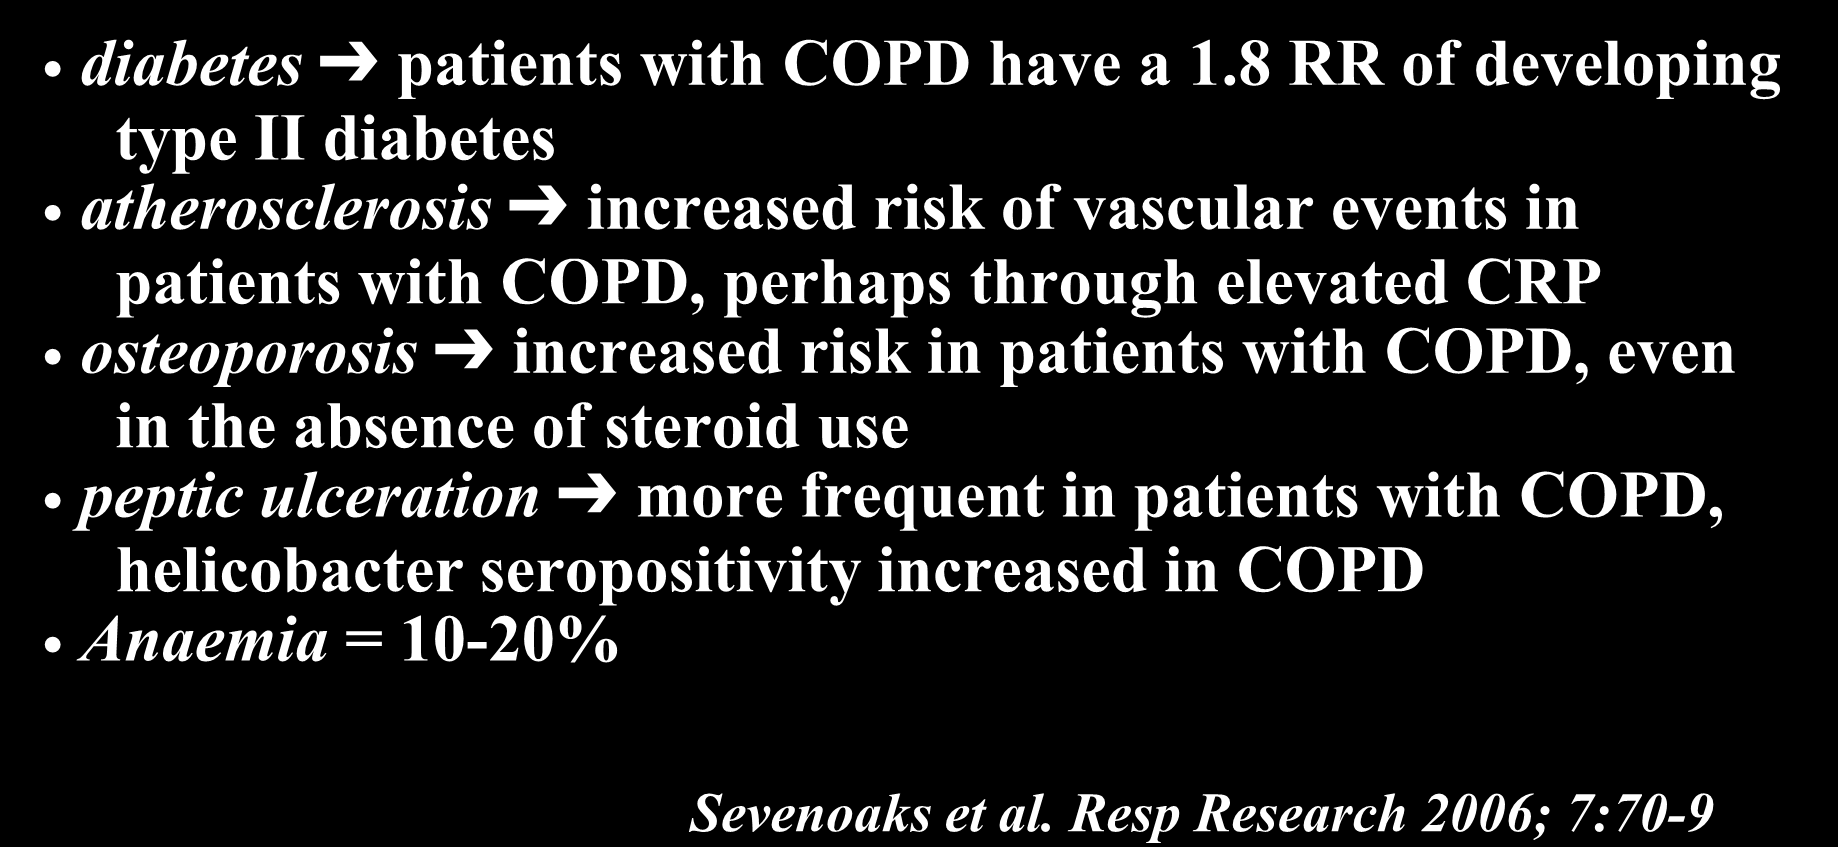 Phenotype: COPD with comorbidities diabetes patients with COPD have a 1.